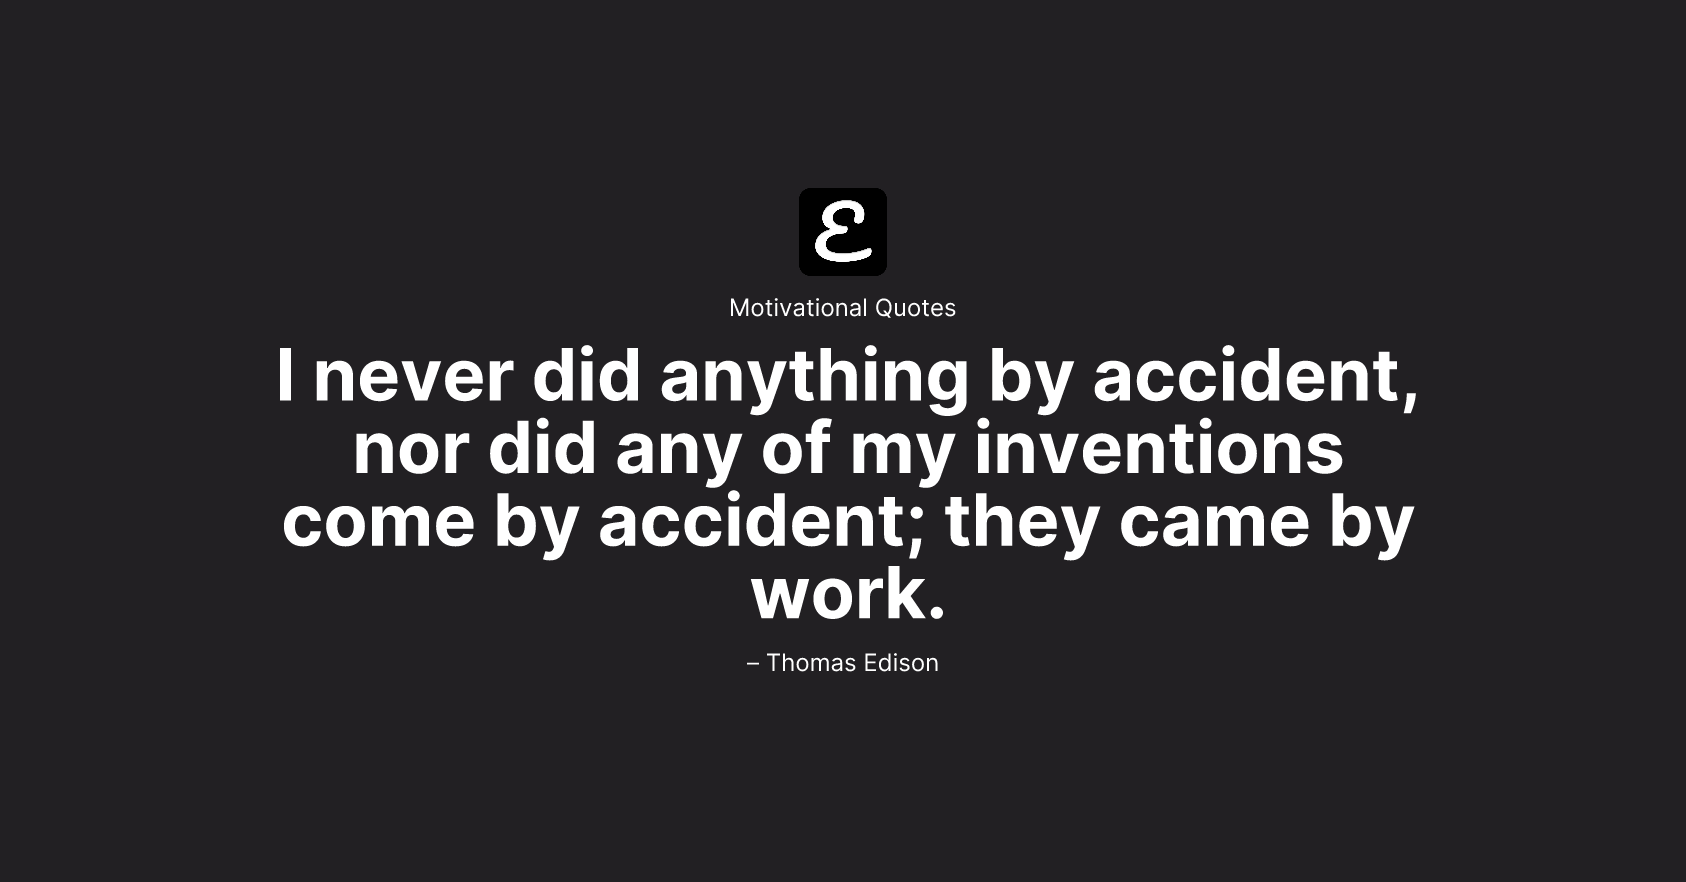 Thomas Edison - I never did anything by accident, nor did any of my inventions come by accident; they came by work.